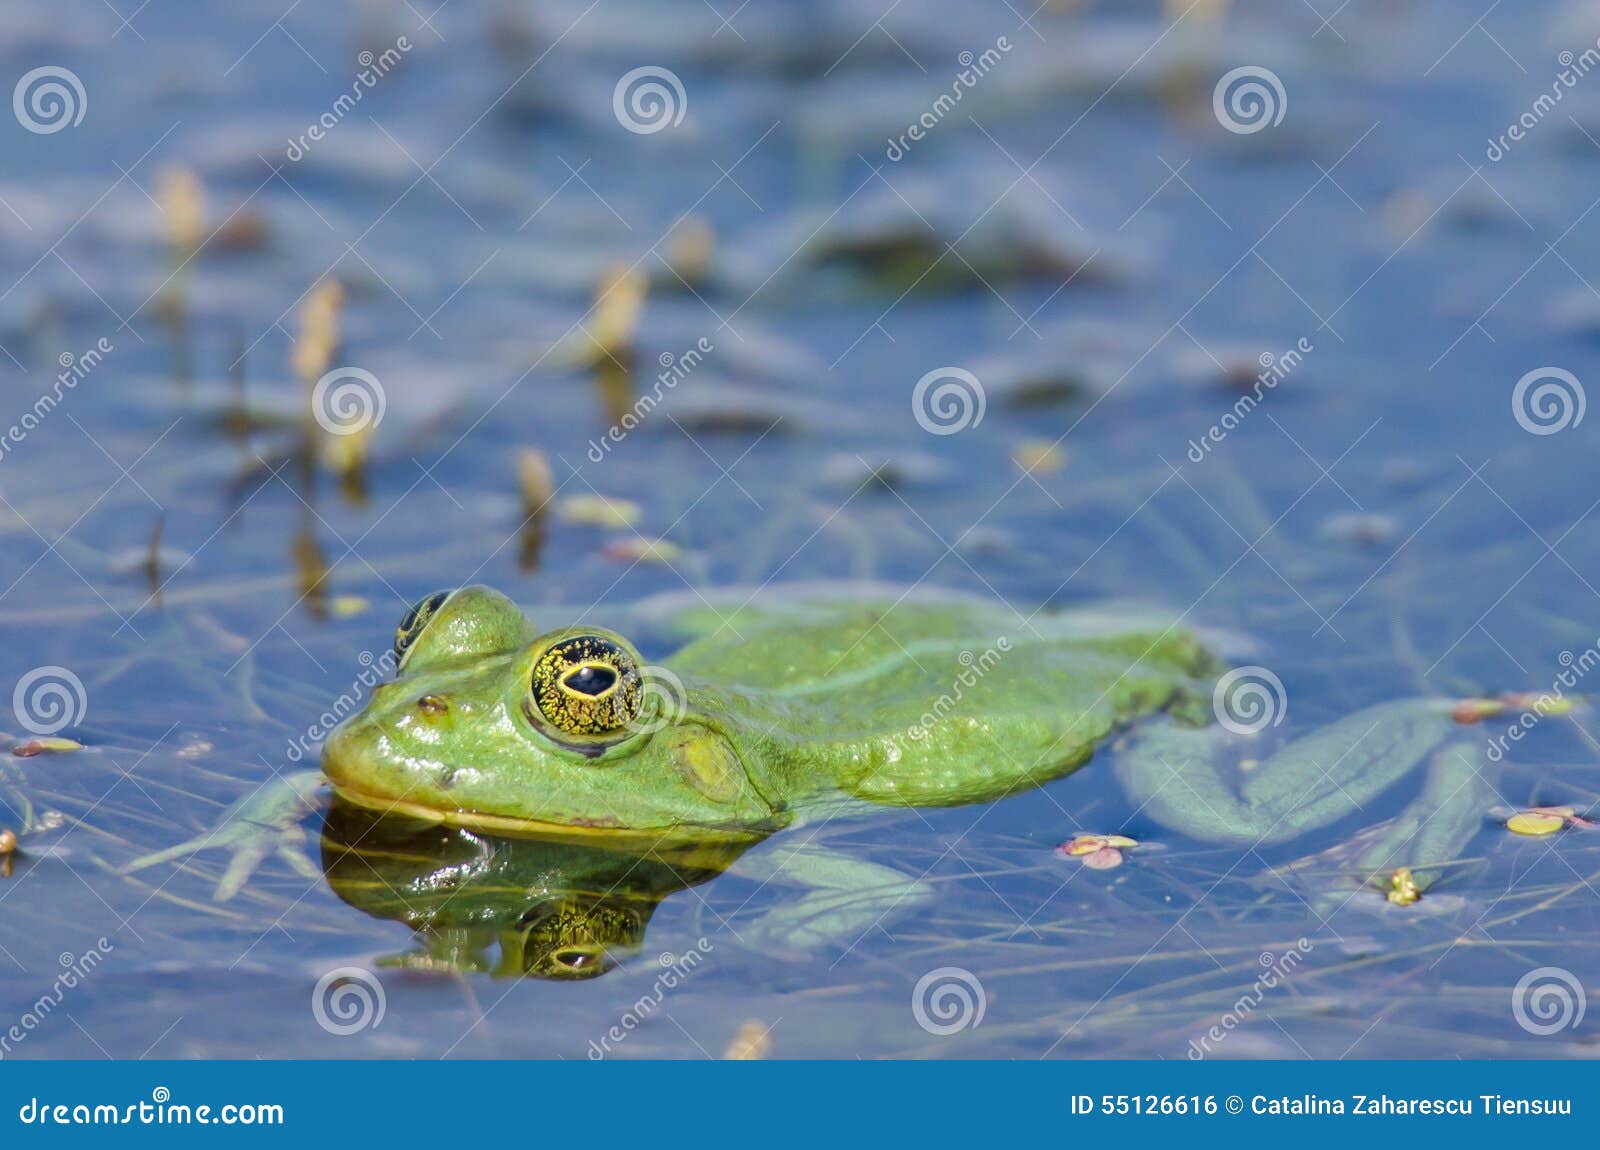 green frog in the water